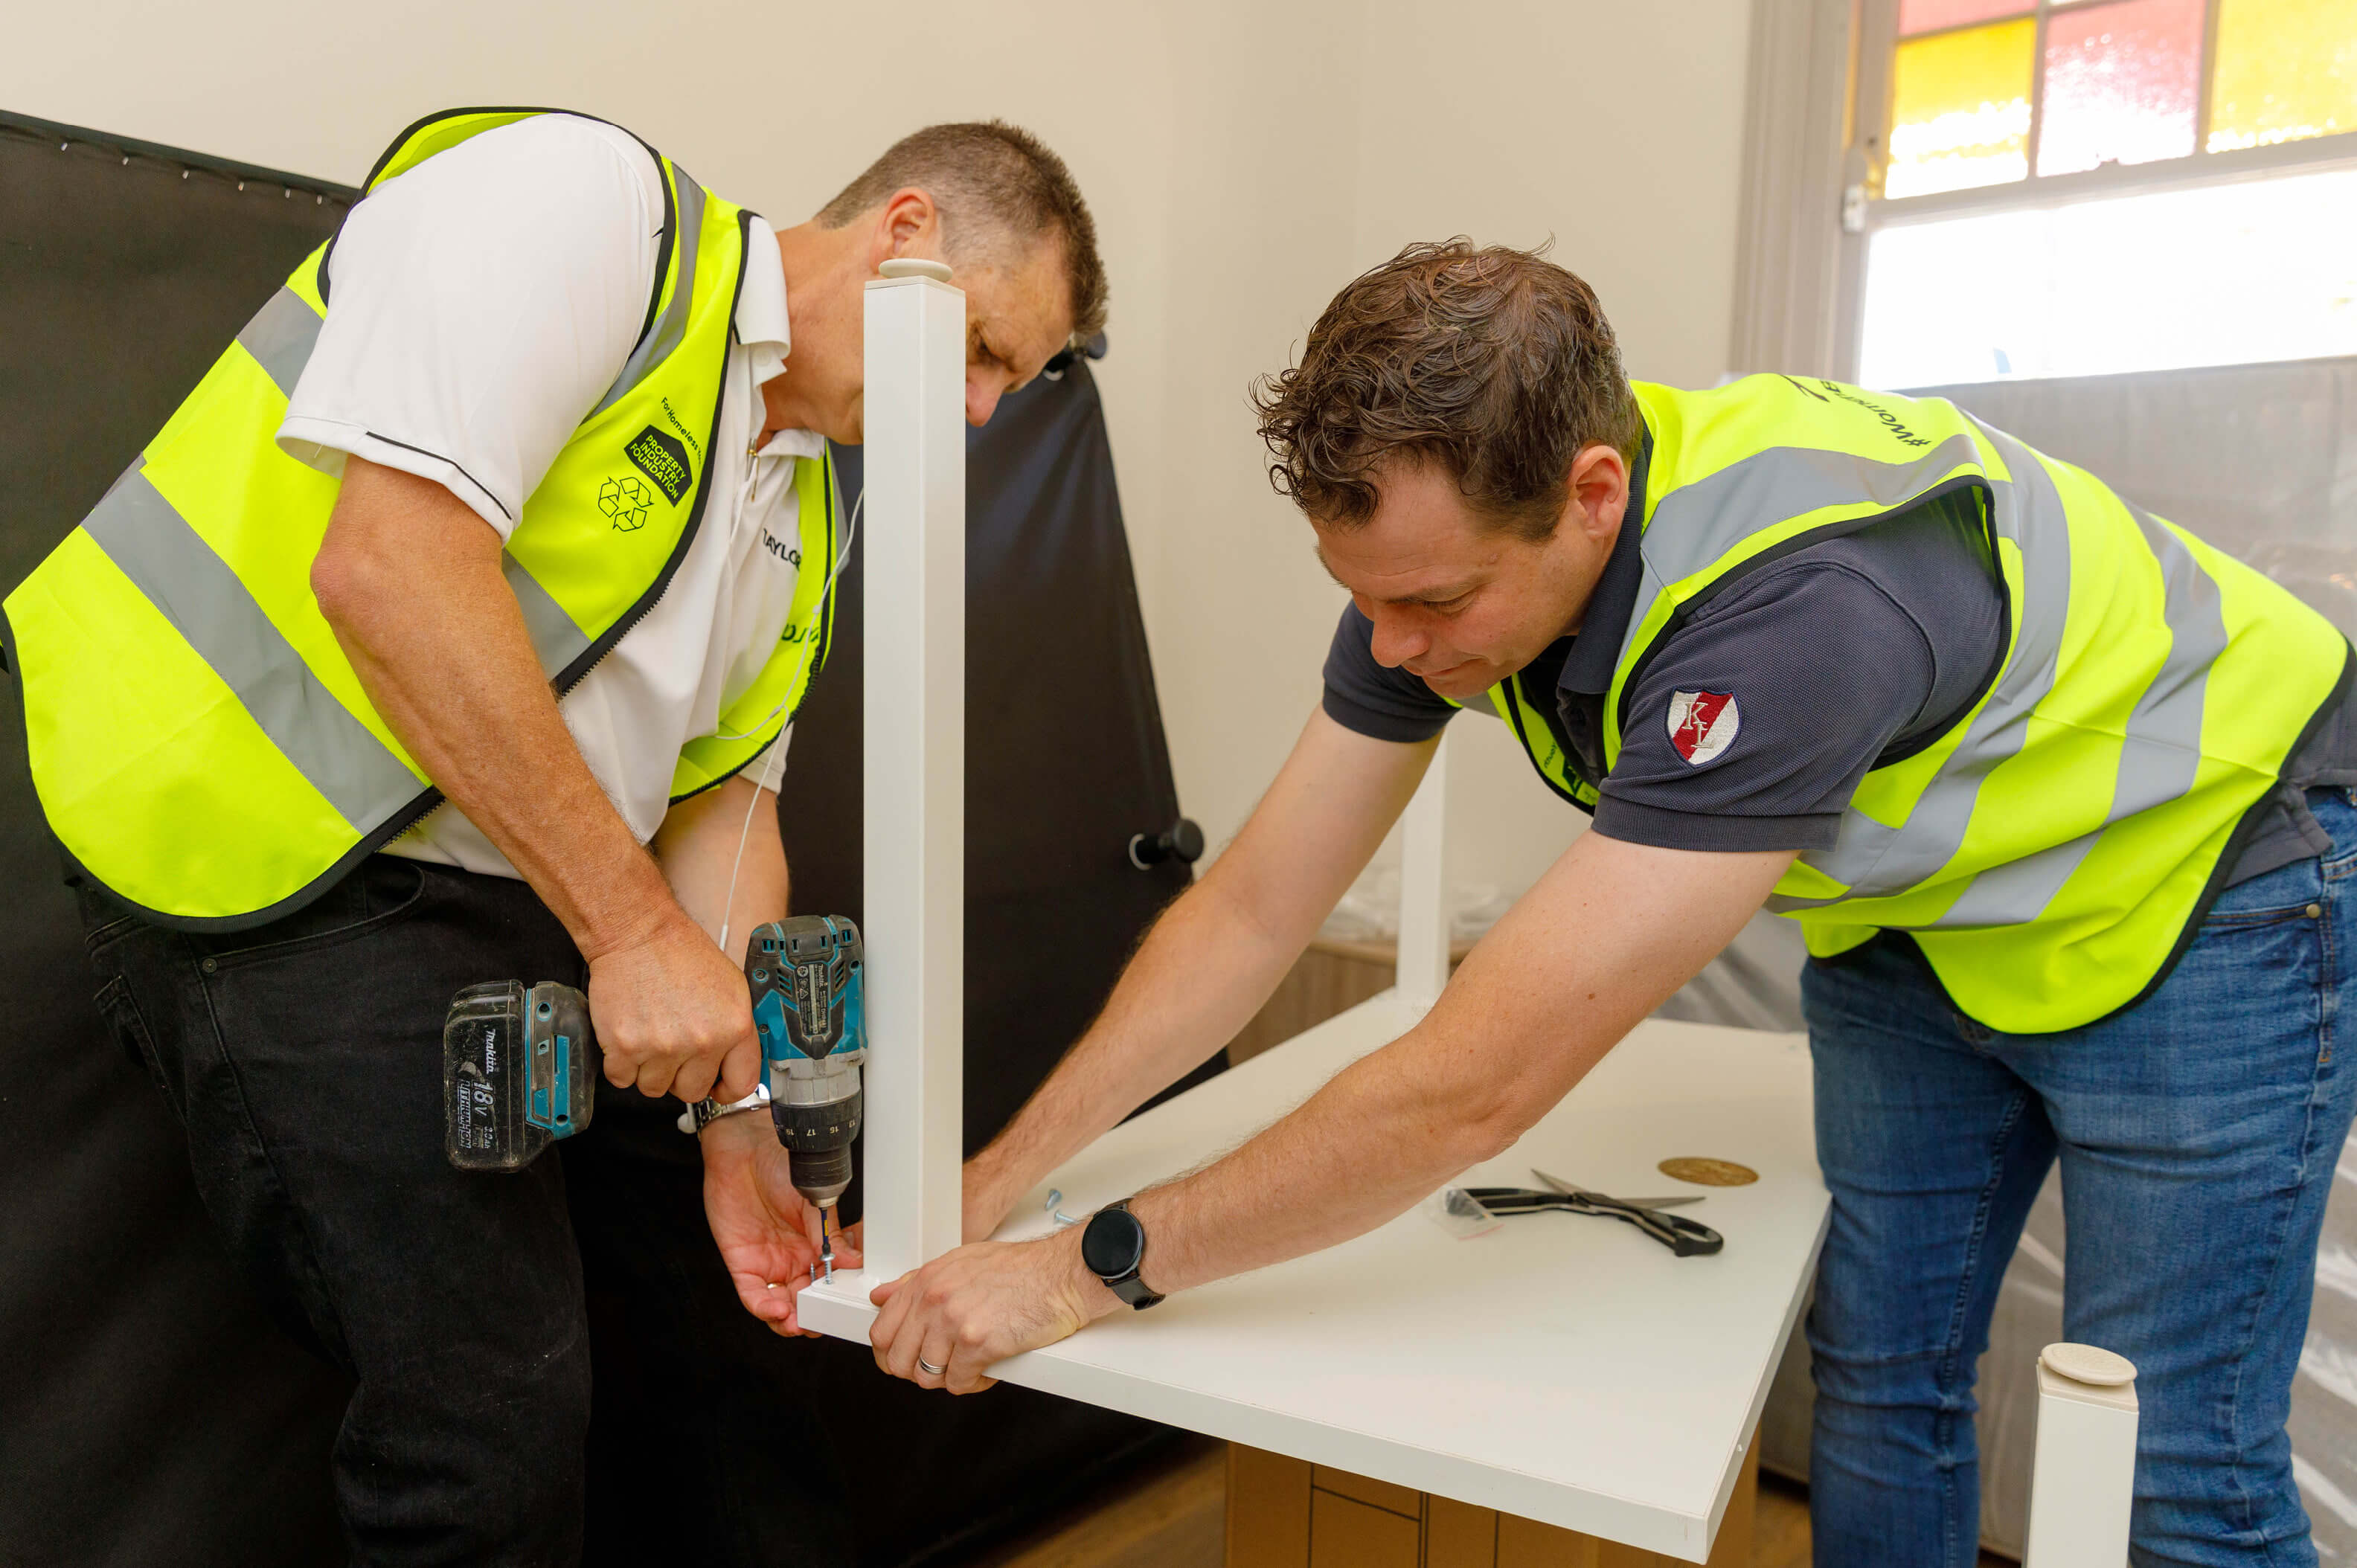 06 fixing up flatpack furniture taylor news article property industry foundation haven house in dulwich hill